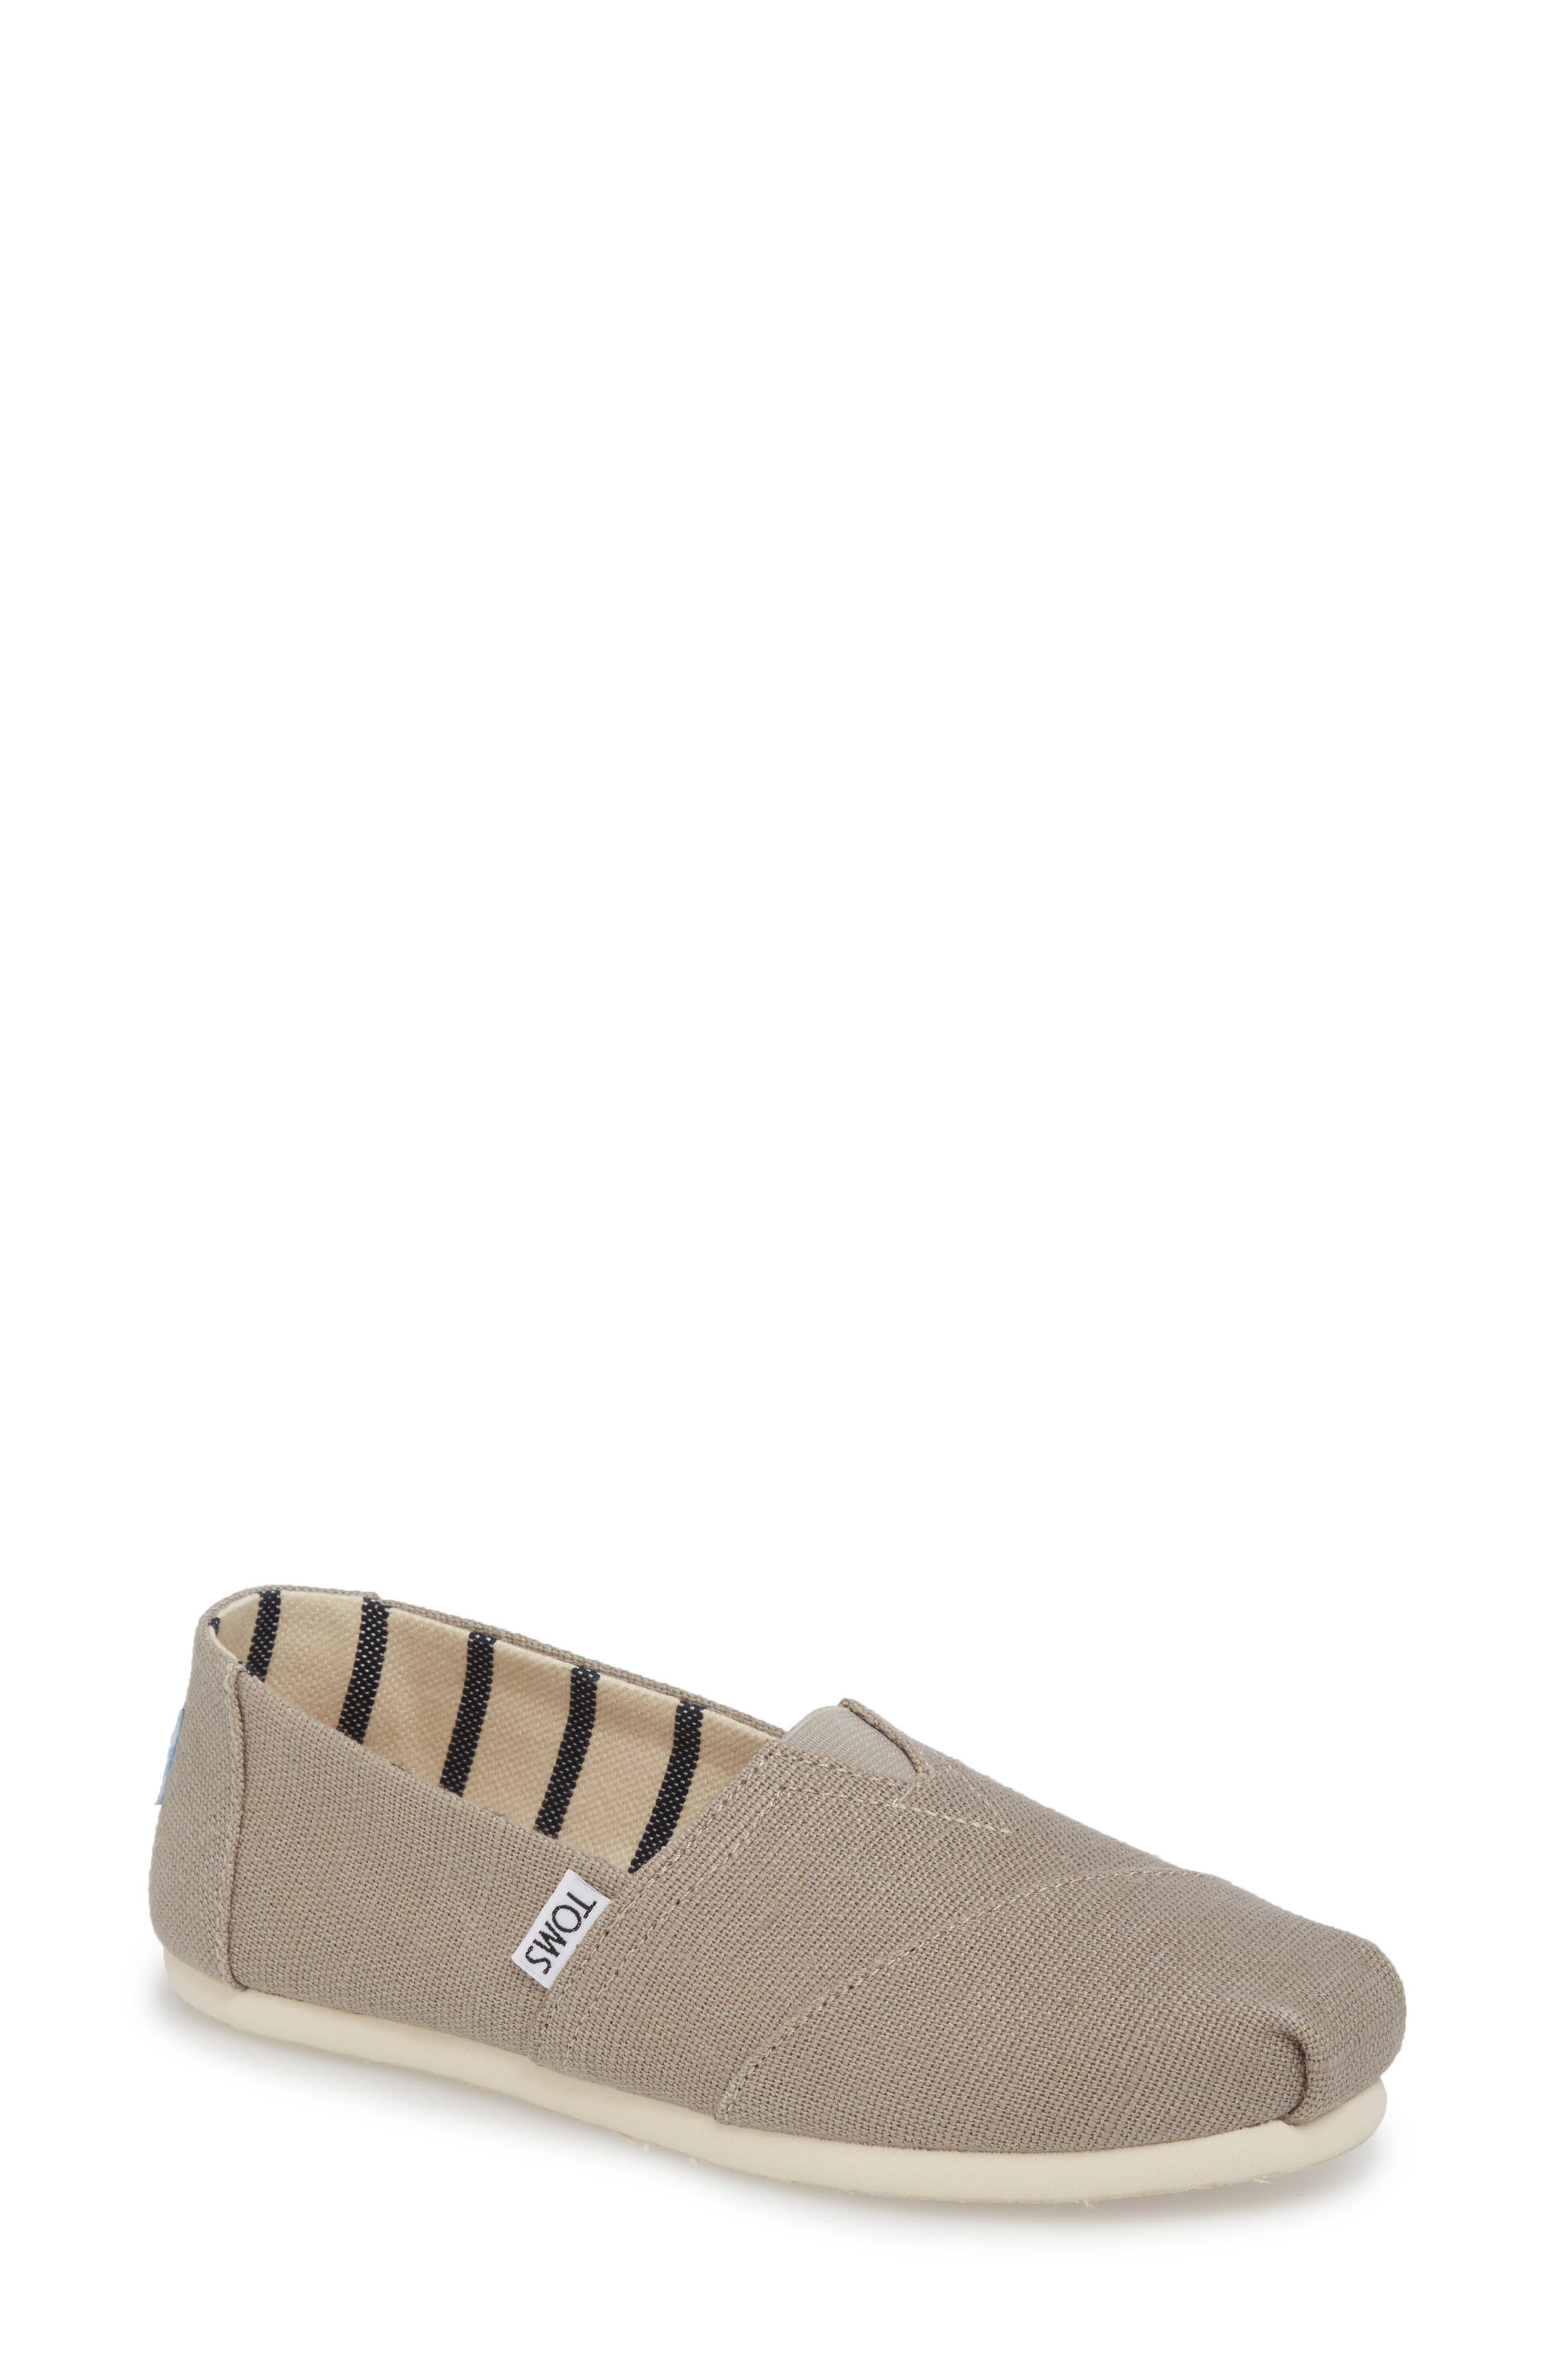 toms morning dove heritage canvas